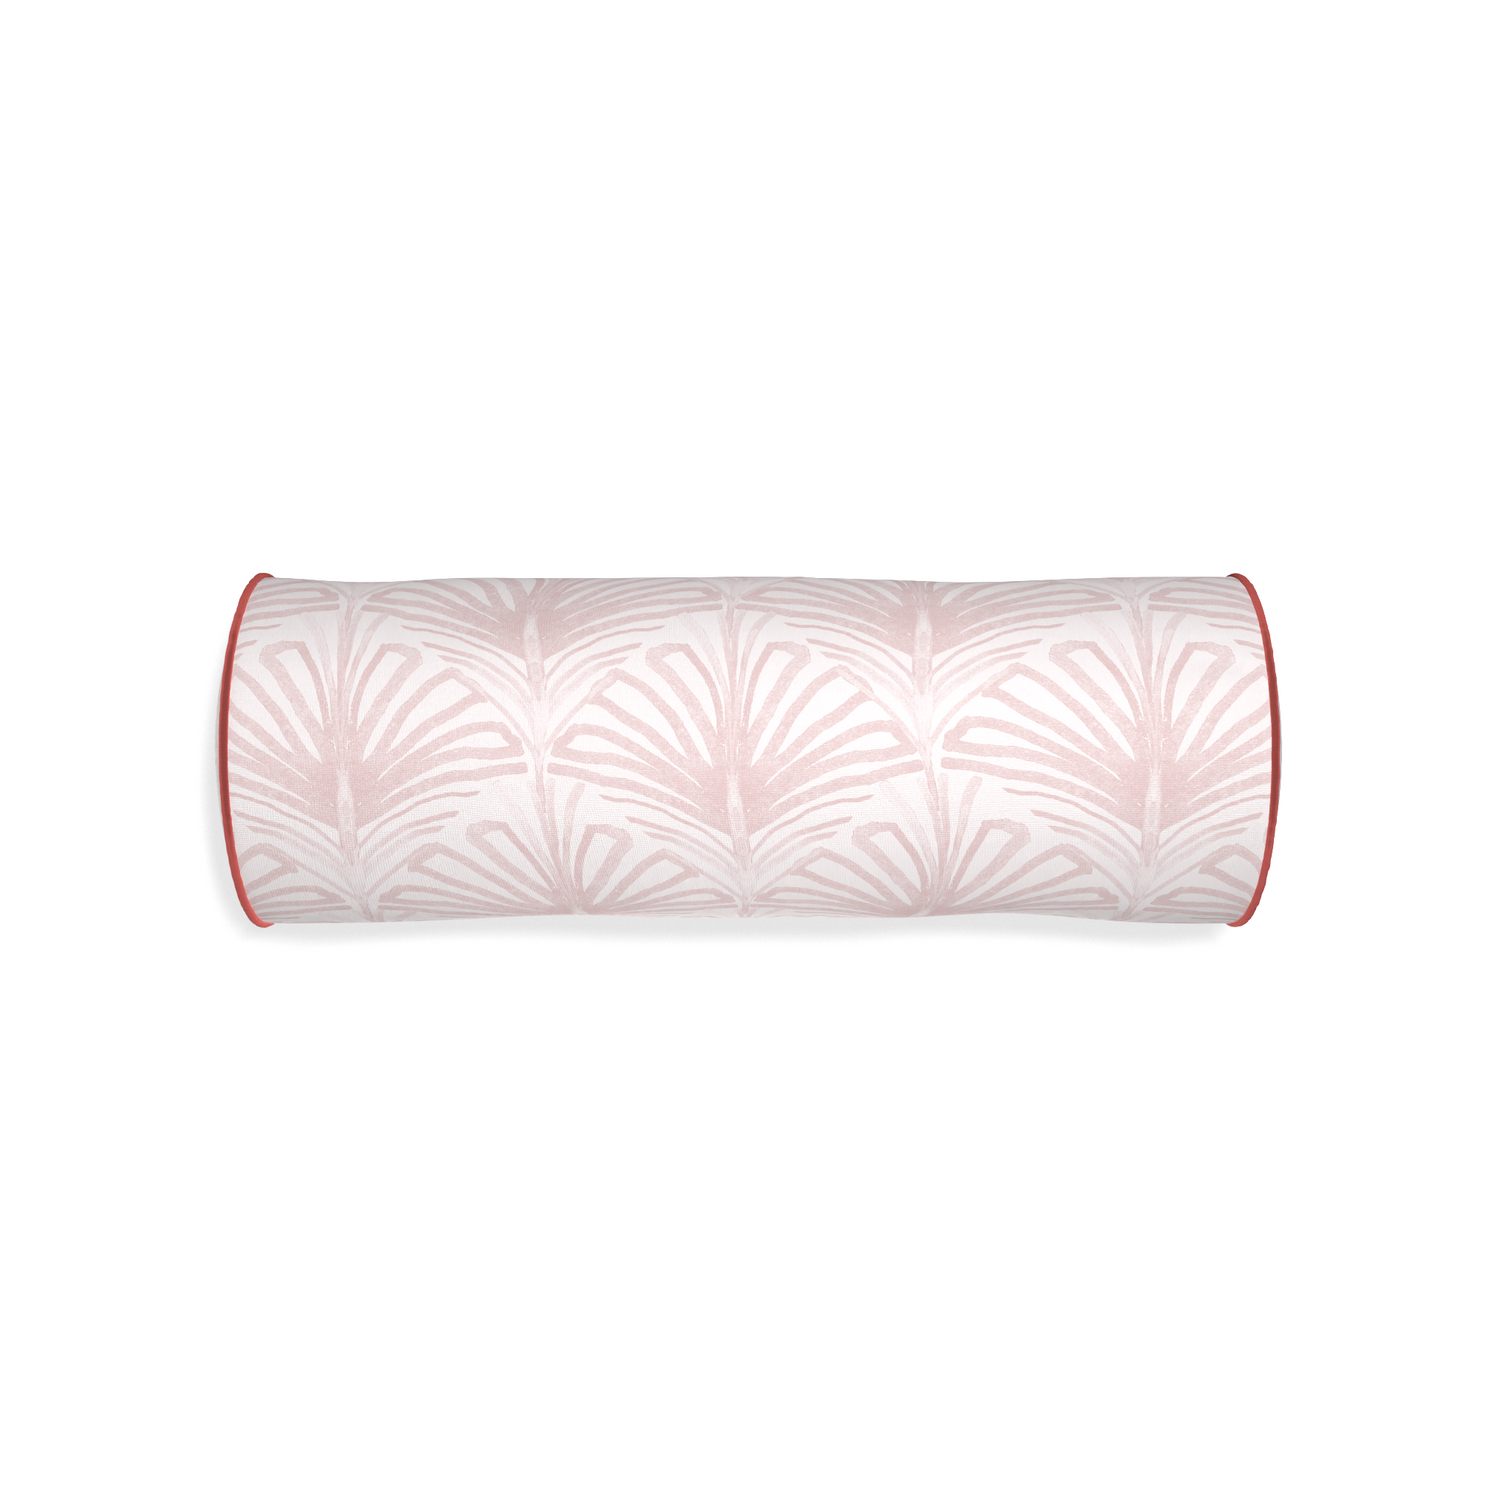 Bolster suzy rose custom rose pink palmpillow with c piping on white background